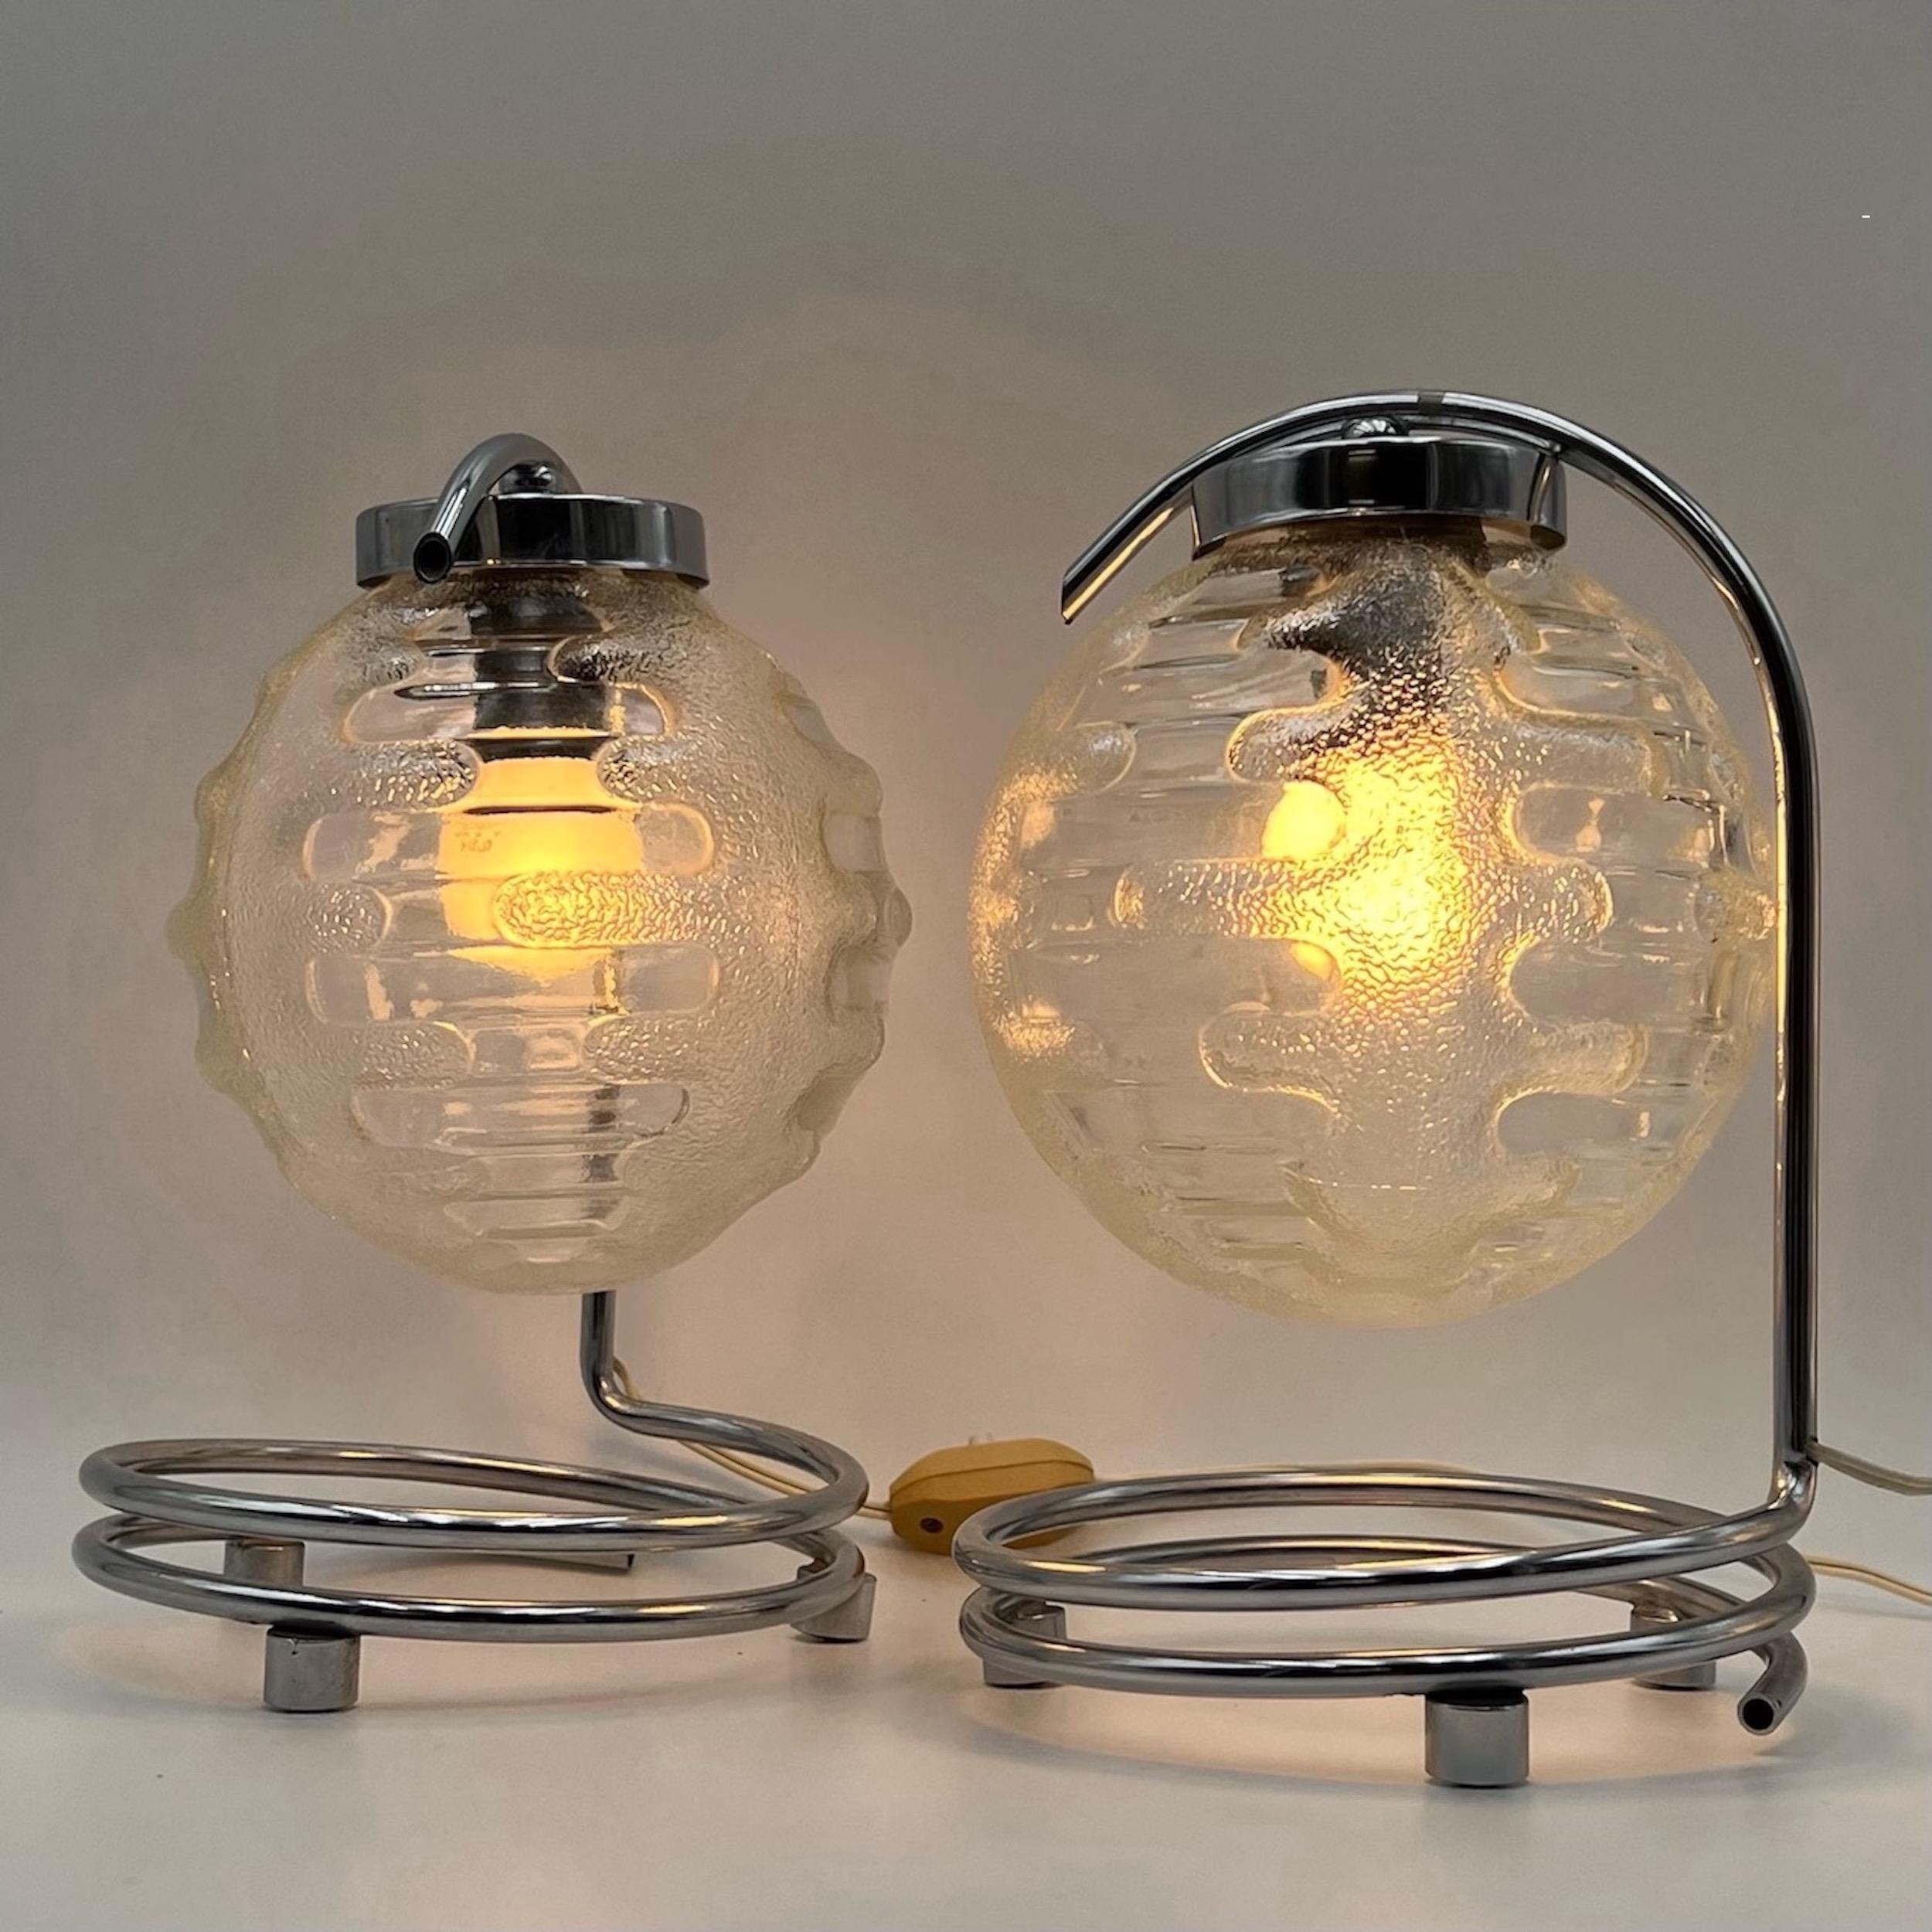 Chromed Lamps with Patterned Glass Globes by Richard Essig, 1970s, Set of 2 For Sale 3